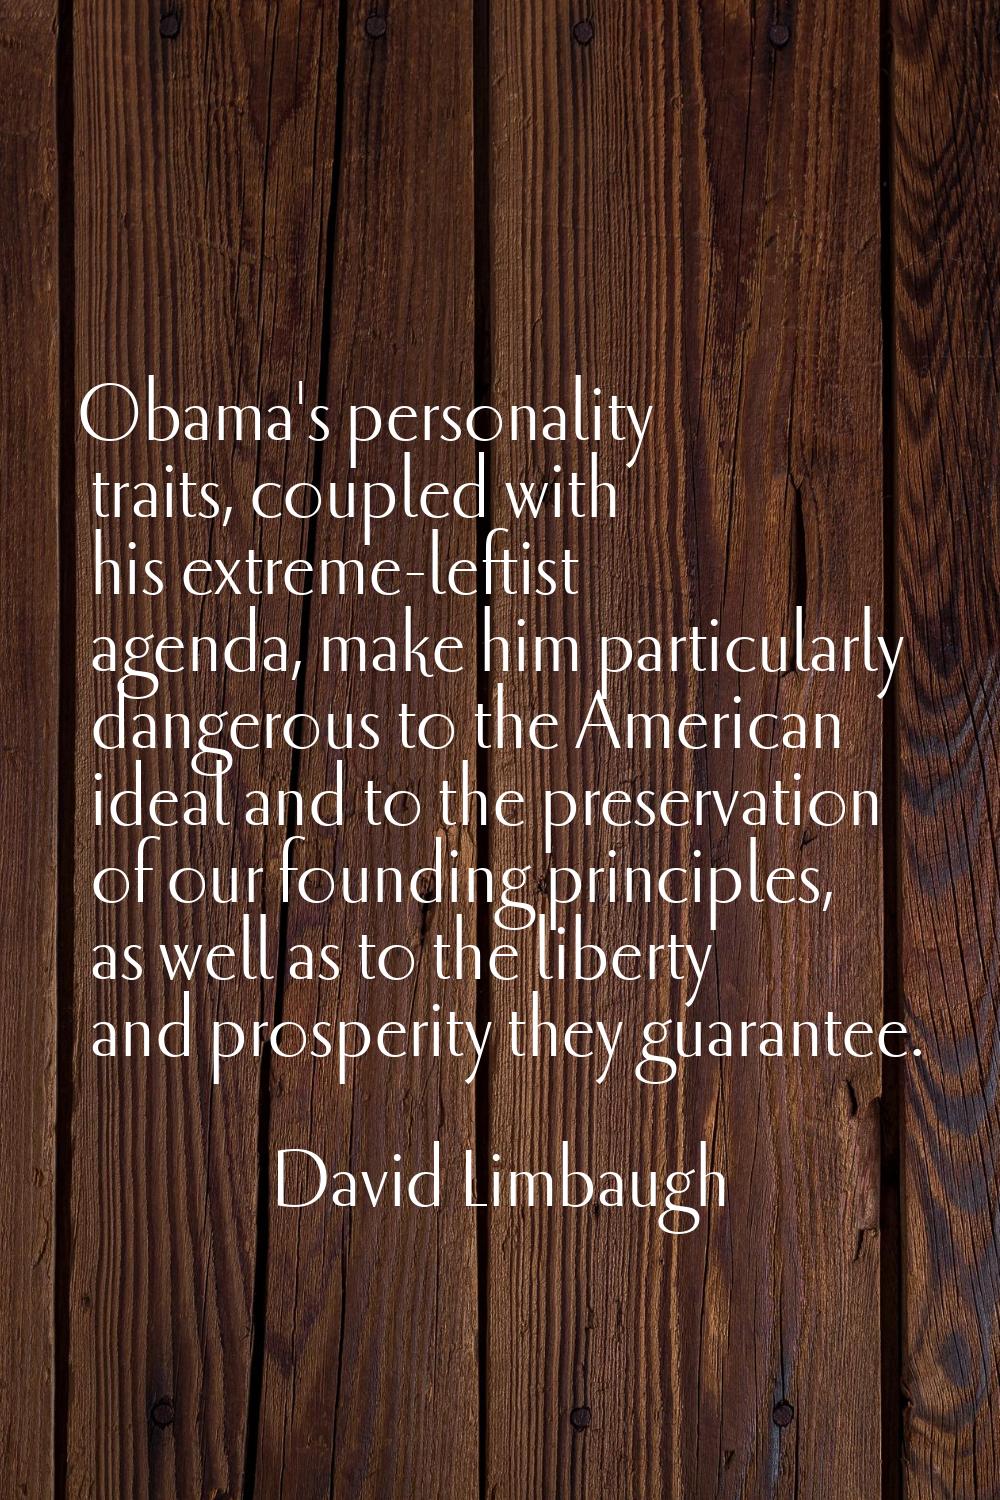 Obama's personality traits, coupled with his extreme-leftist agenda, make him particularly dangerou